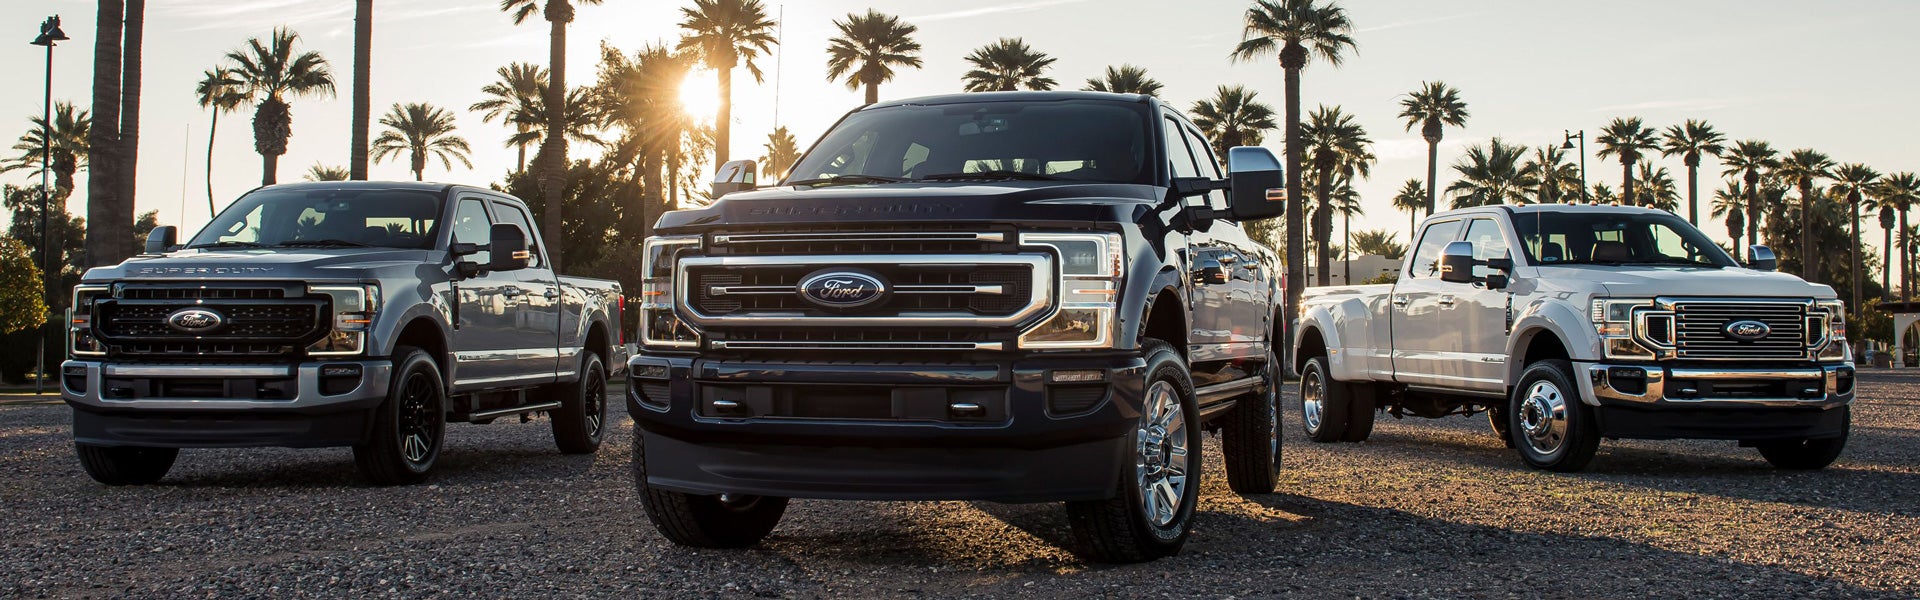 New 2021 Ford F-250 For Sale